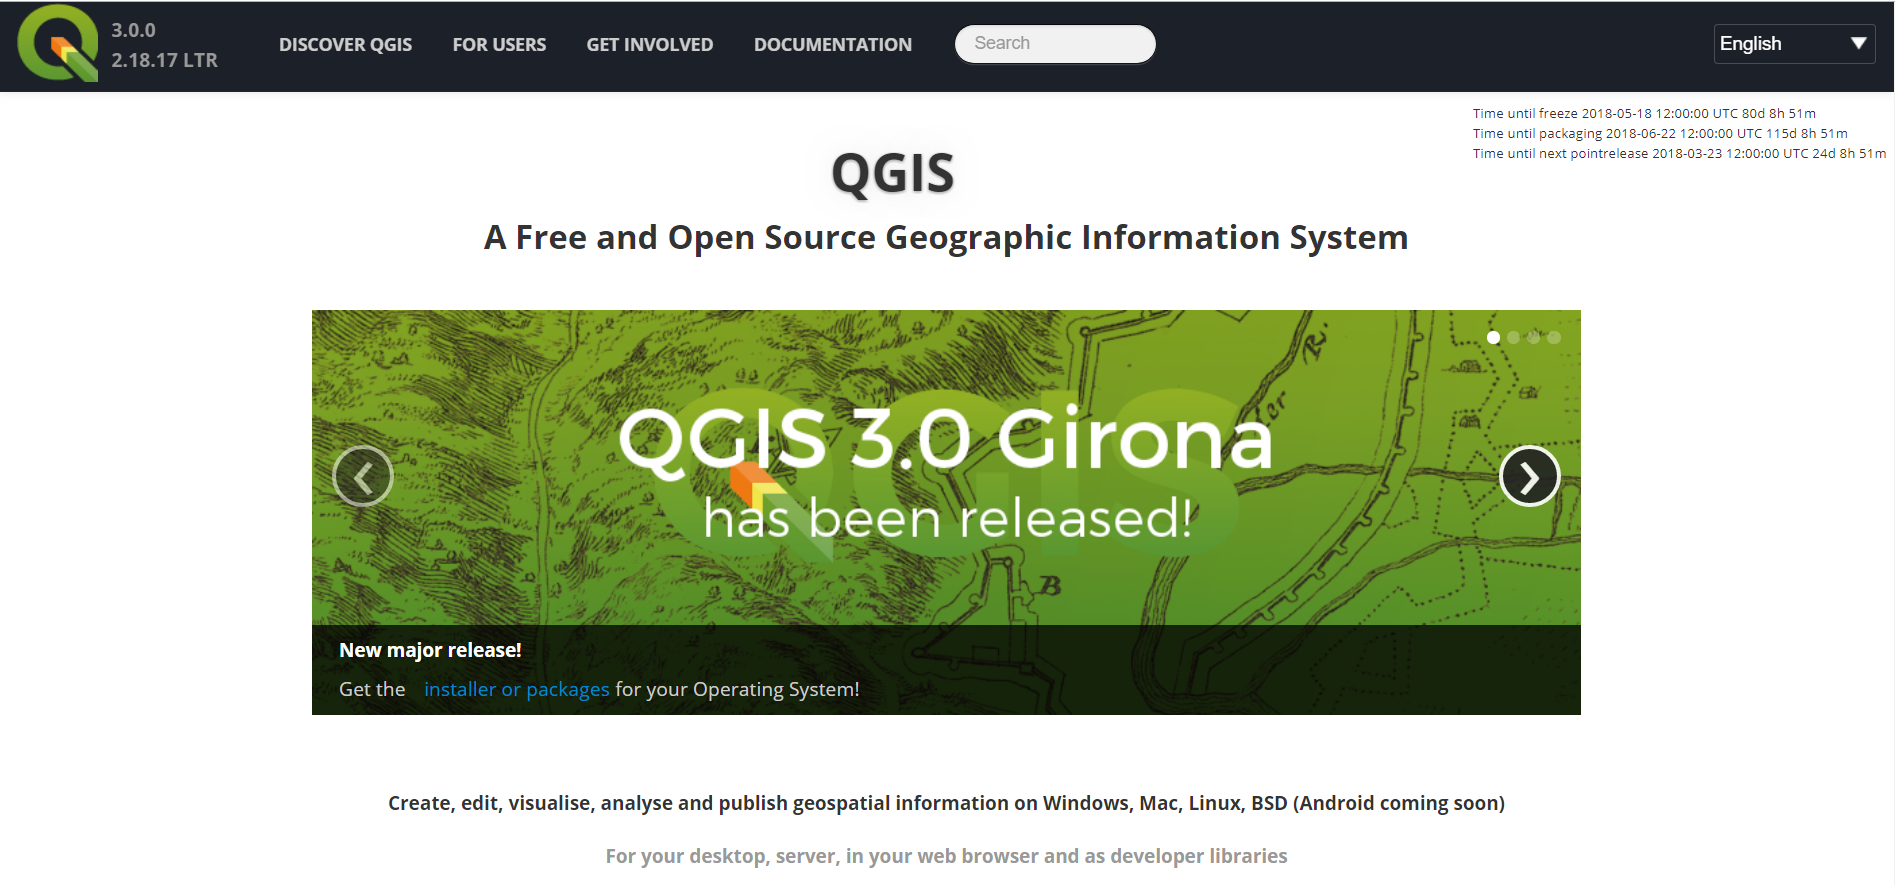 ../../_images/Intro_QGIS_01.png